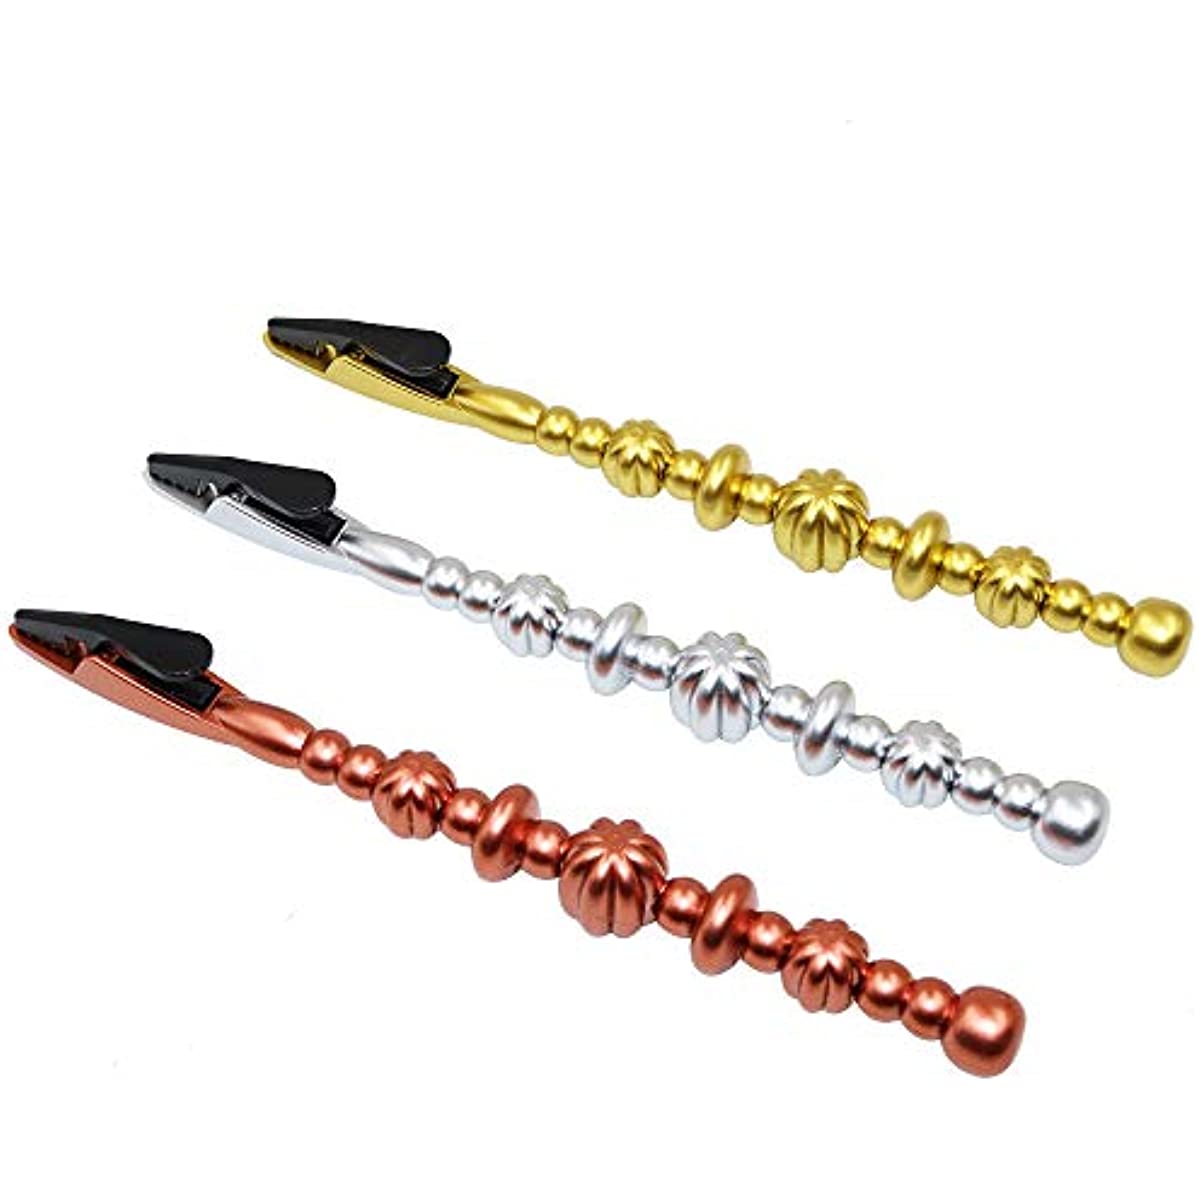 Bracelet Tool Buddy Jewelry Helper Fastening Aid For Necklaces